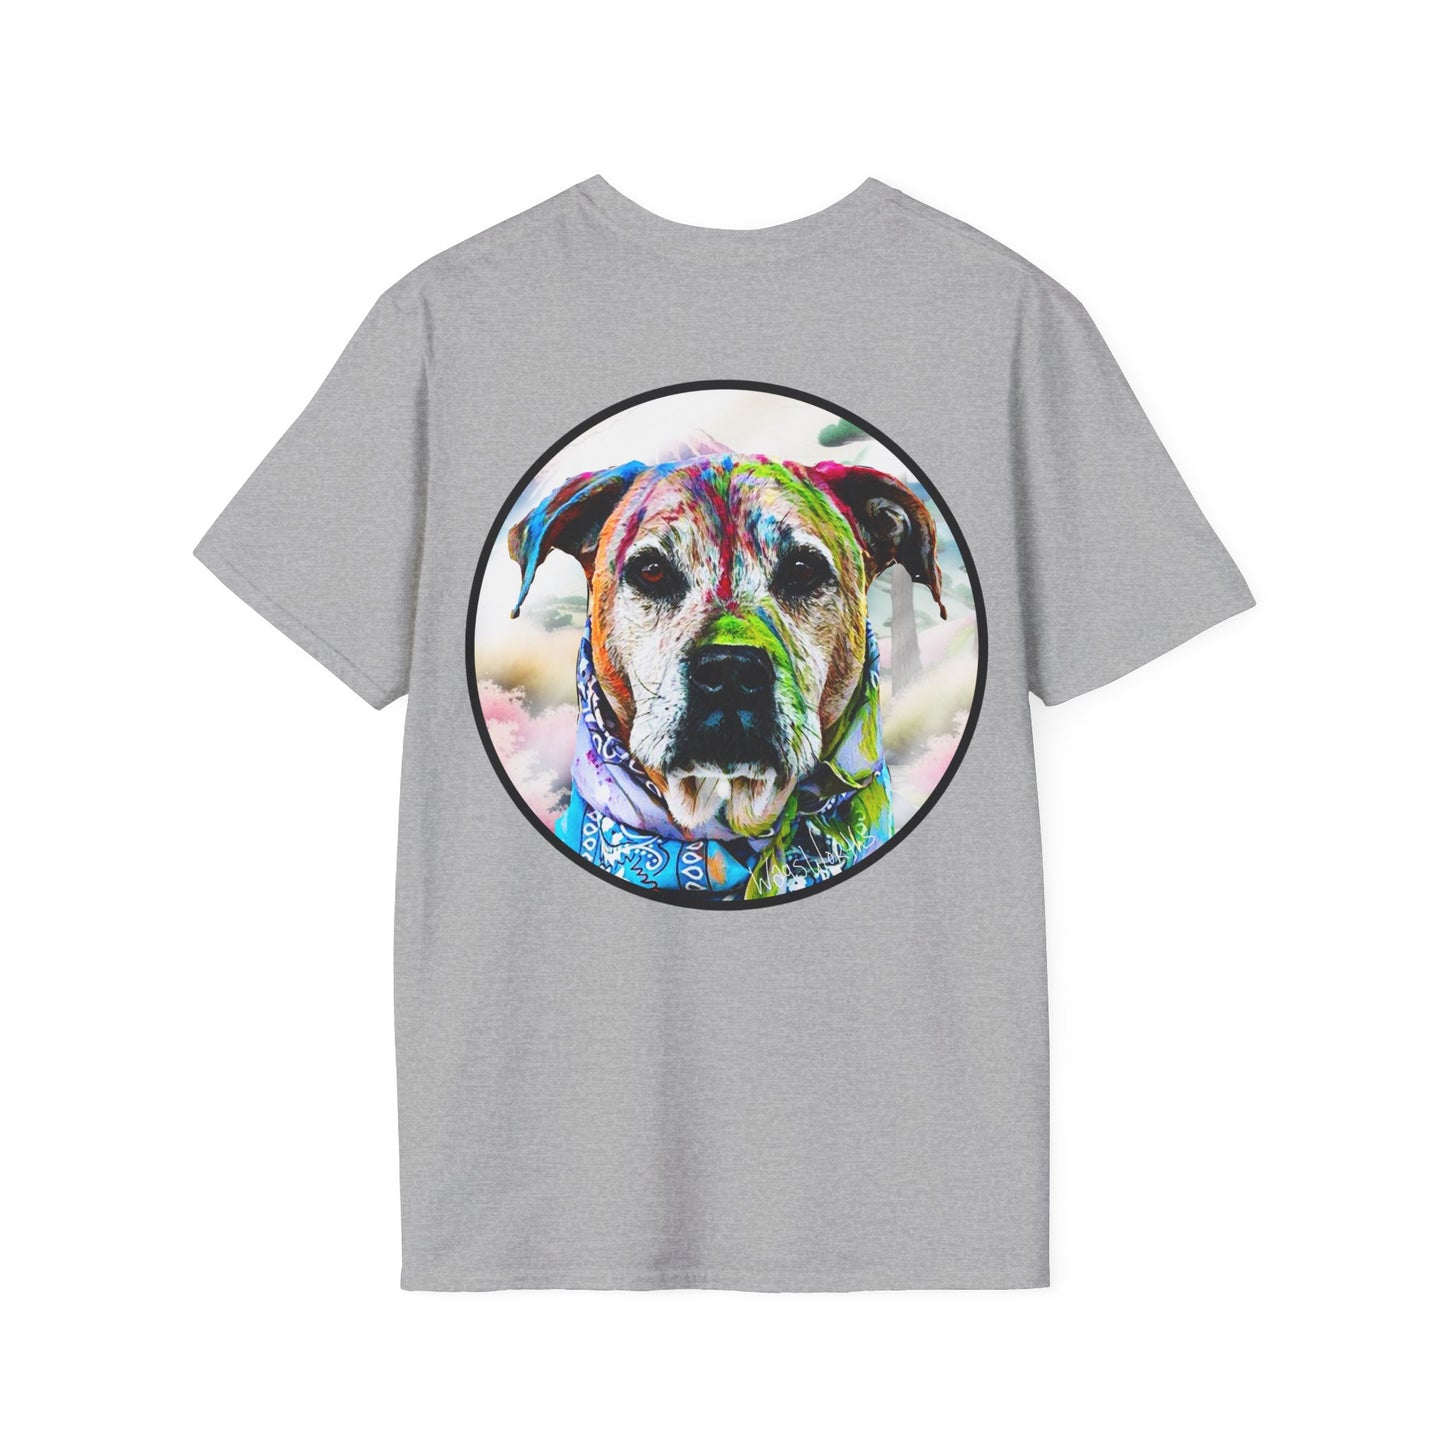 Zola in Oil Graphic Tee